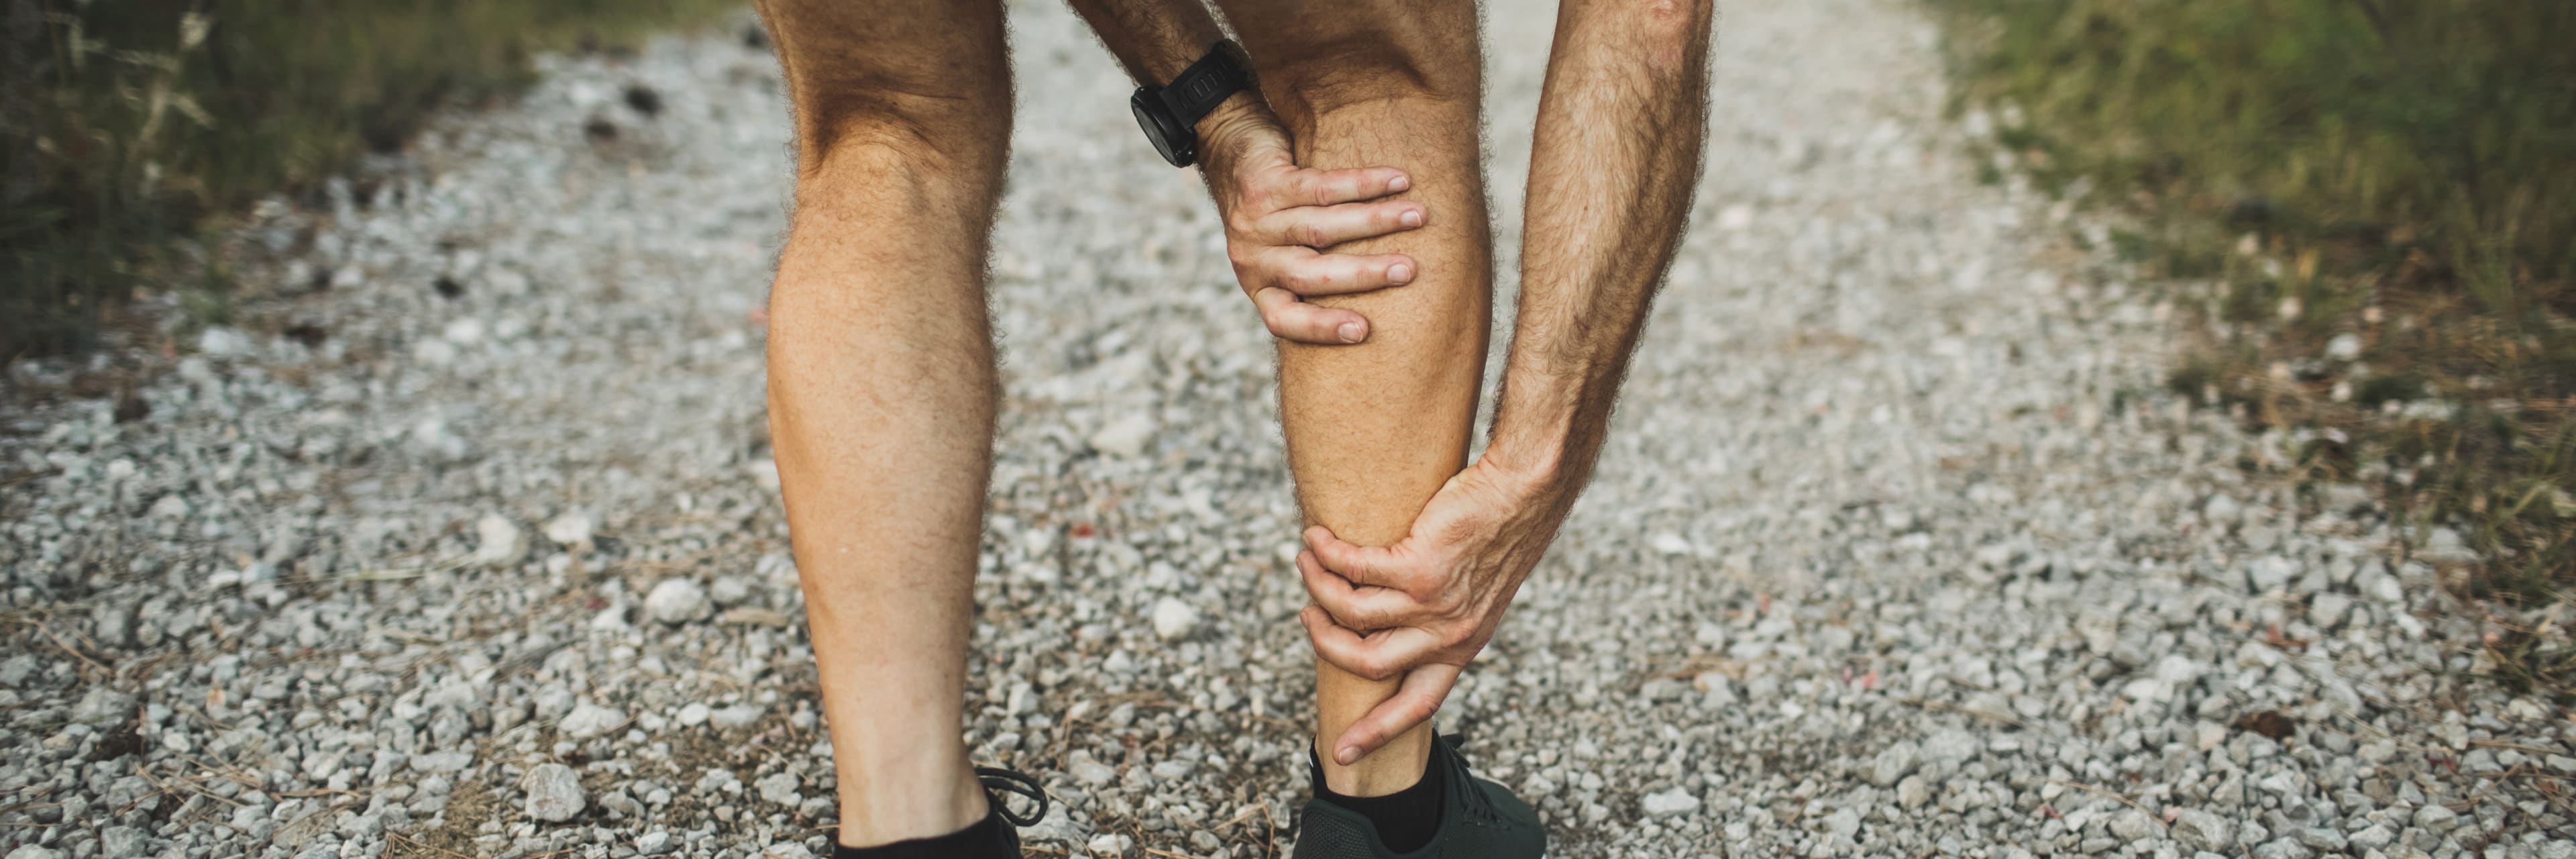 view of a man from behind wearing shorts and athletic shoes that was exercising on a gravel walking path is bent over holding his right calf from pain.